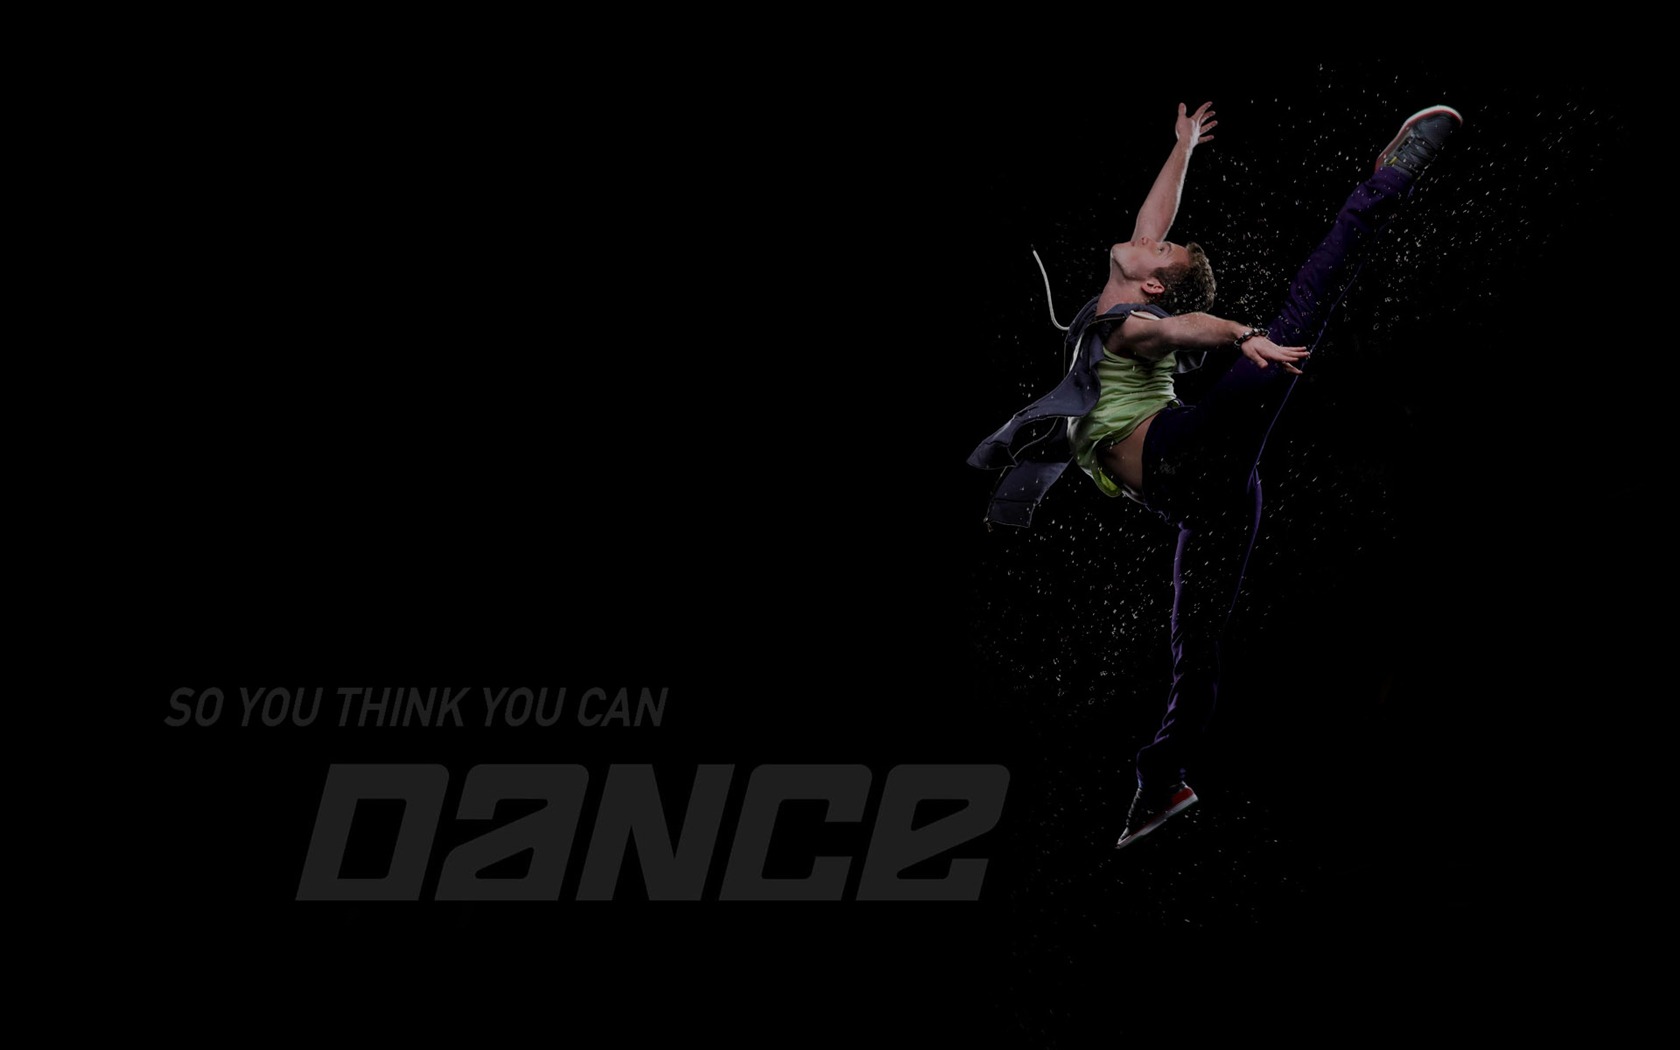 So You Think You Can Dance 舞林爭霸壁紙(二) #8 - 1680x1050